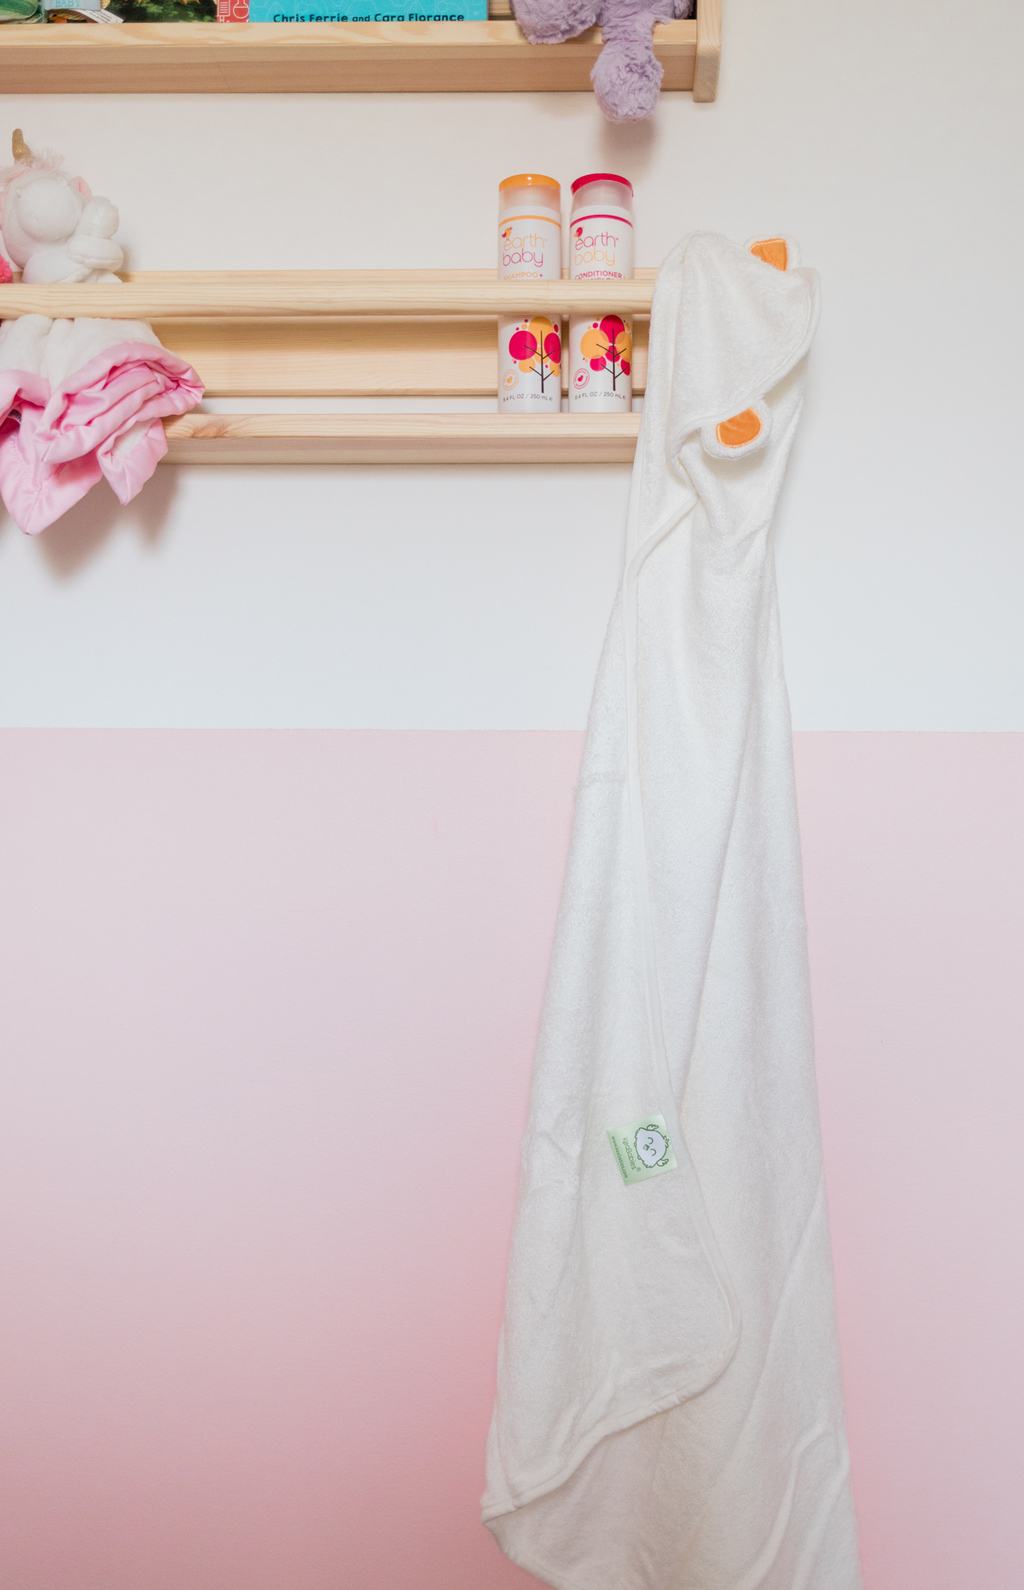 14 Helpful Items For Your New Baby Checklist